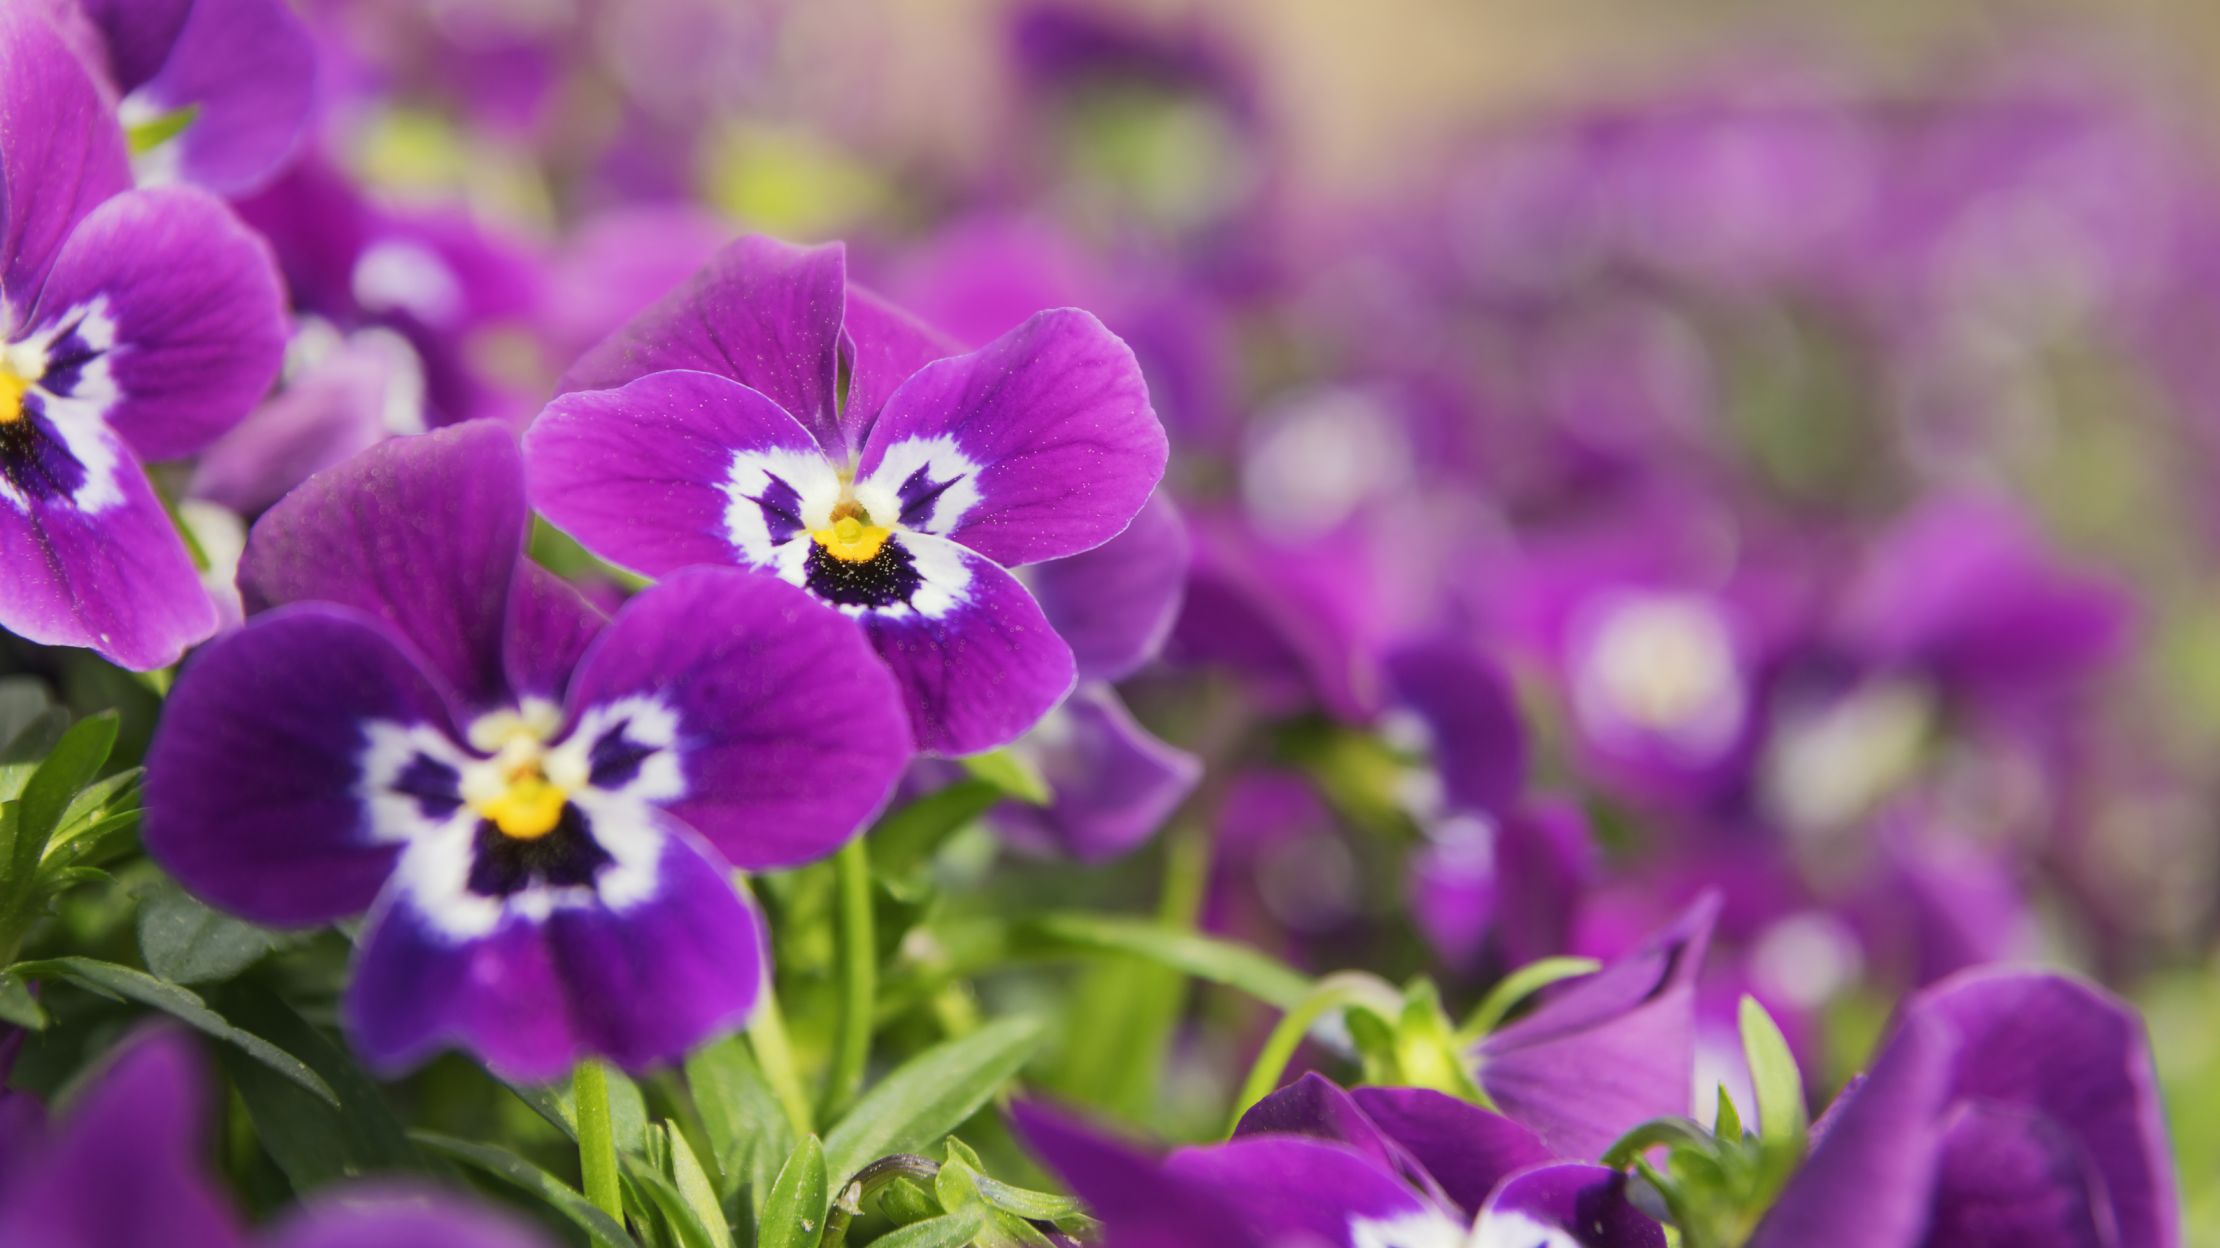 10 easy-to-grow plants for first-time gardeners | mental floss